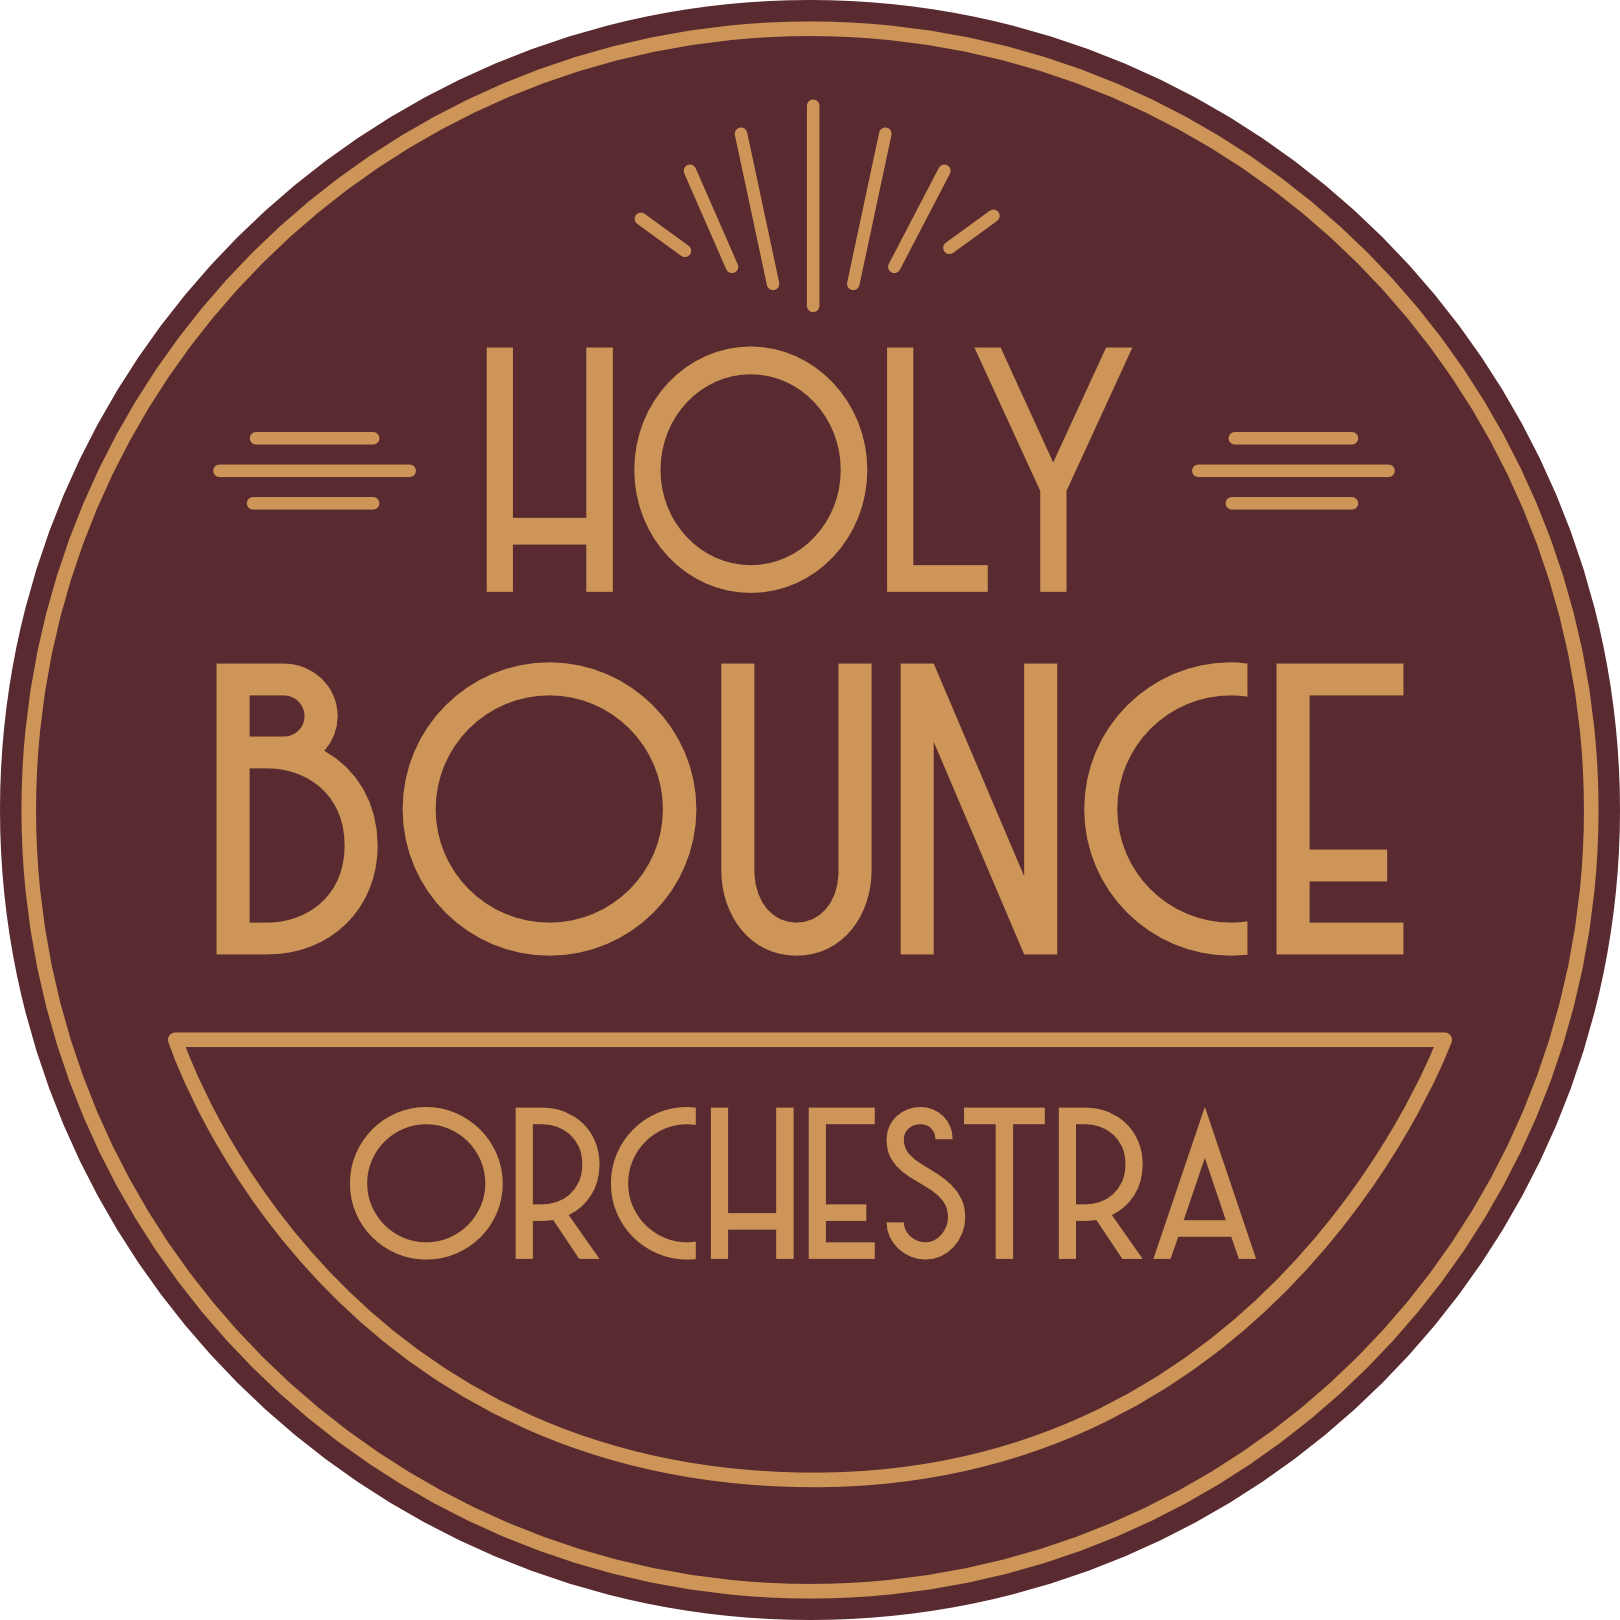 Holy Bounce Orchestra